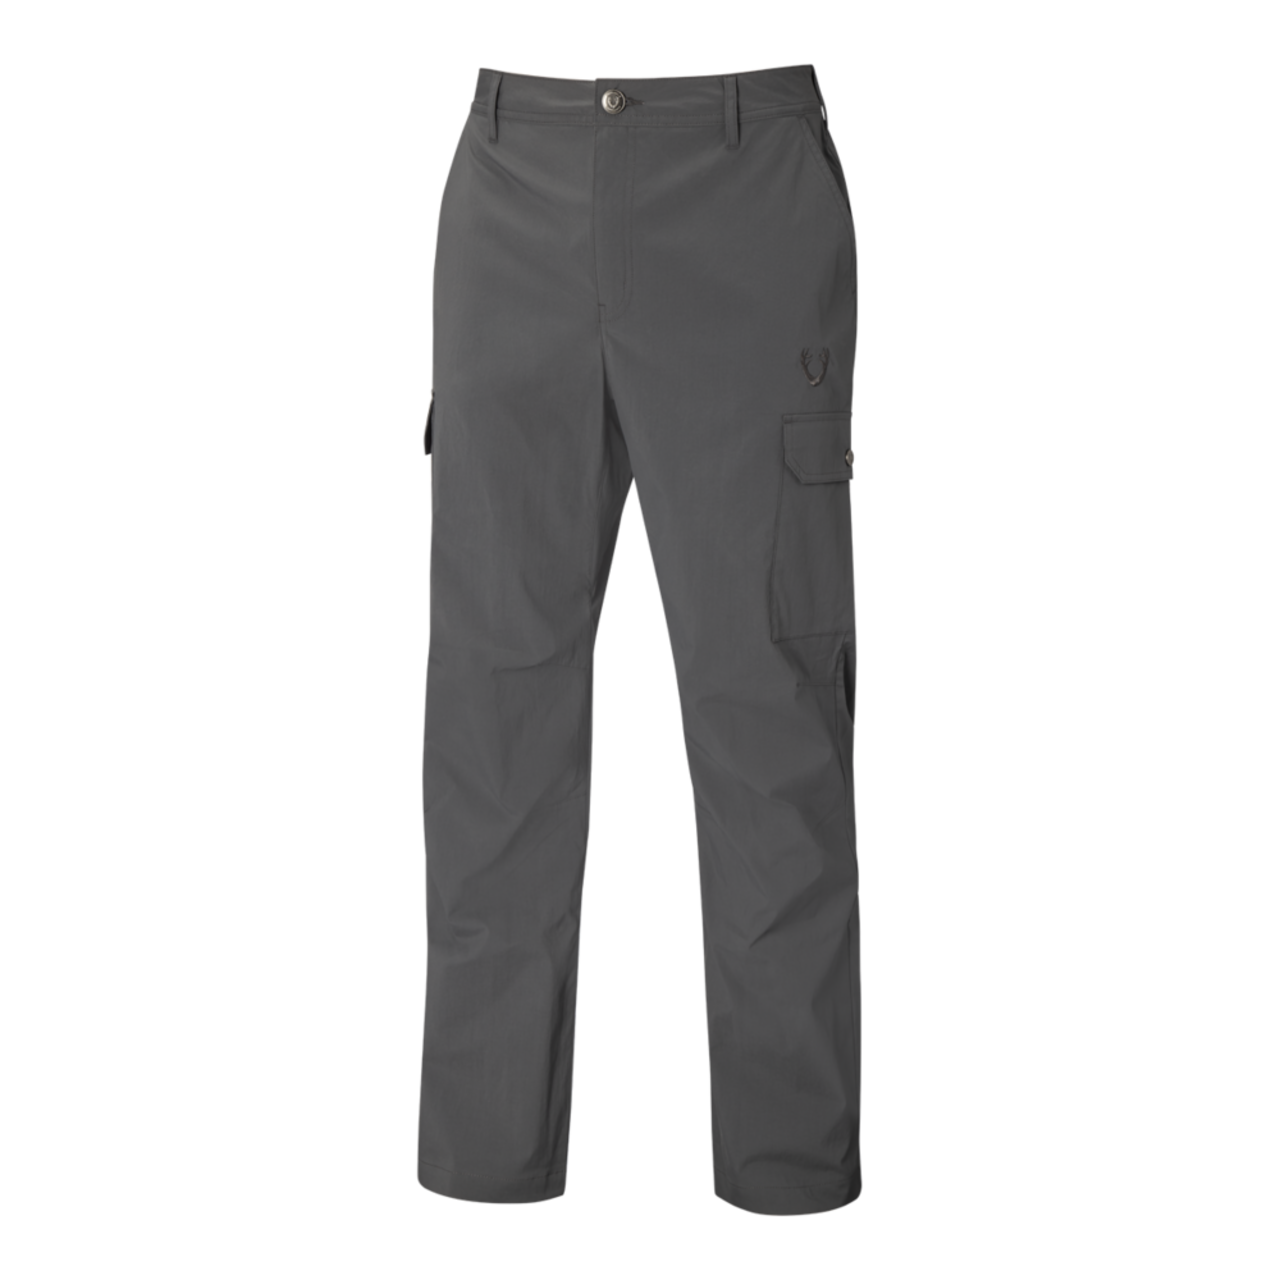 https://media-www.canadiantire.ca/product/playing/hunting/hunting-apparel-footwear/3751415/mens-sutton-no-fly-zone-pants-m-grey-915db2b0-e54c-4f79-b7ed-c29a57ba52ad.png?imdensity=1&imwidth=640&impolicy=mZoom